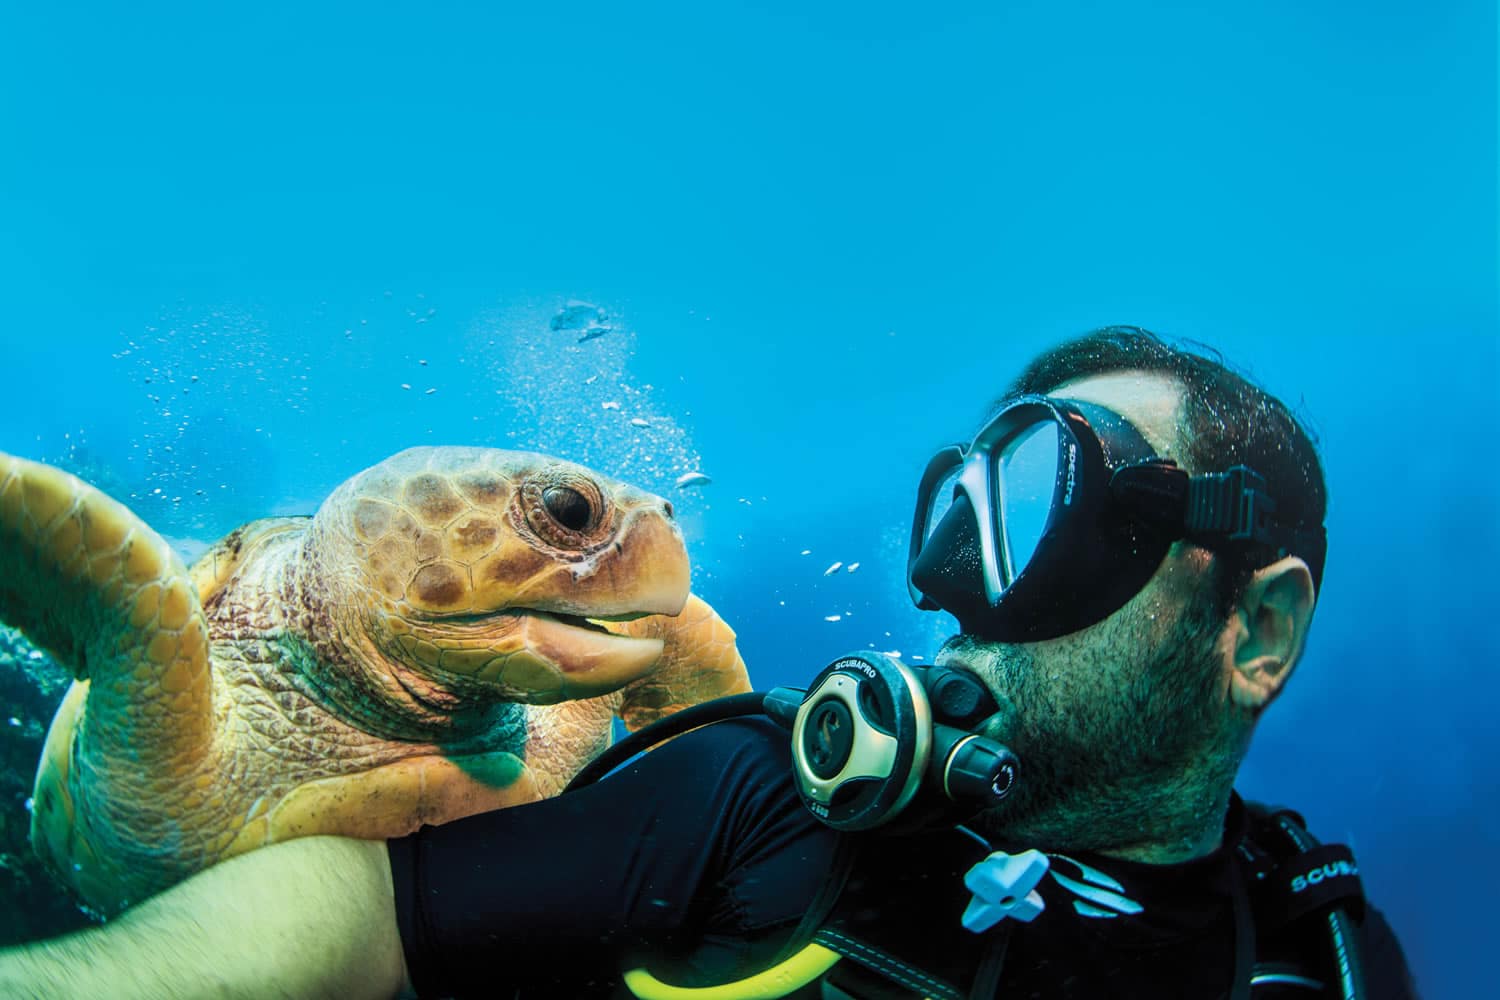 A man enjoying his scuba diving adventure with a turtle off the coast of Staniel Cay, The Bahamas.